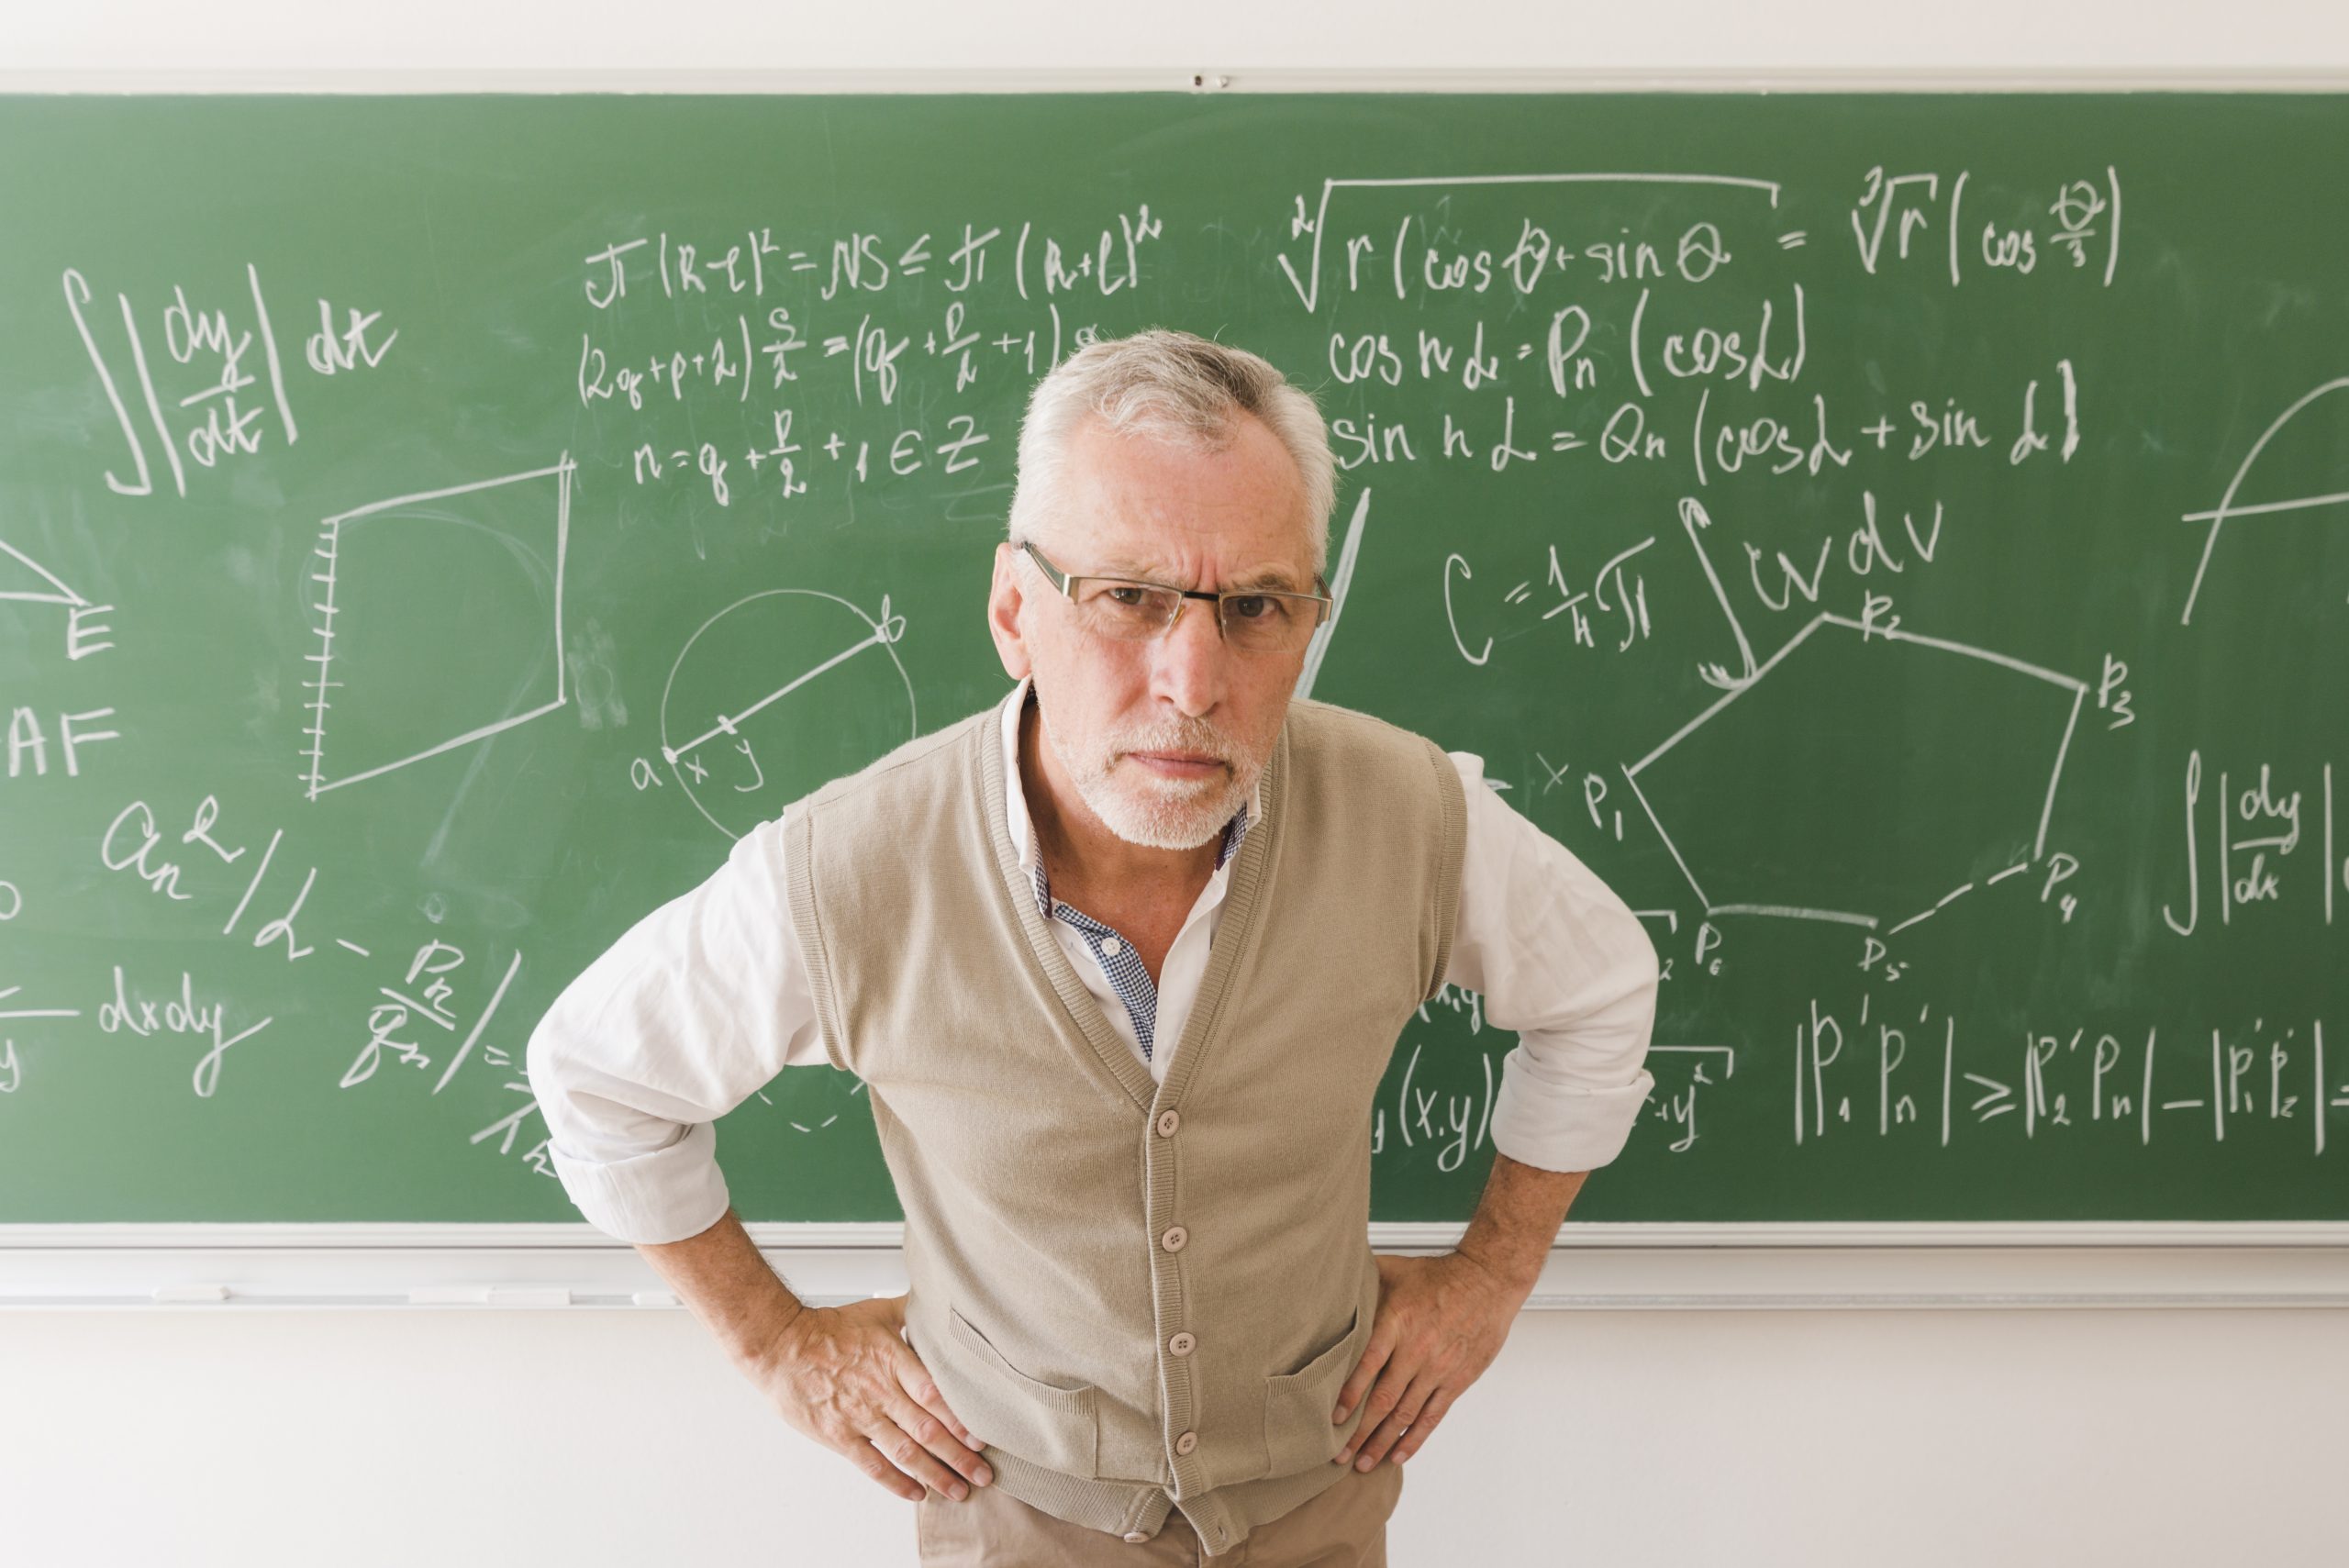 Types of Professors and Your Tactics for Getting an “A”